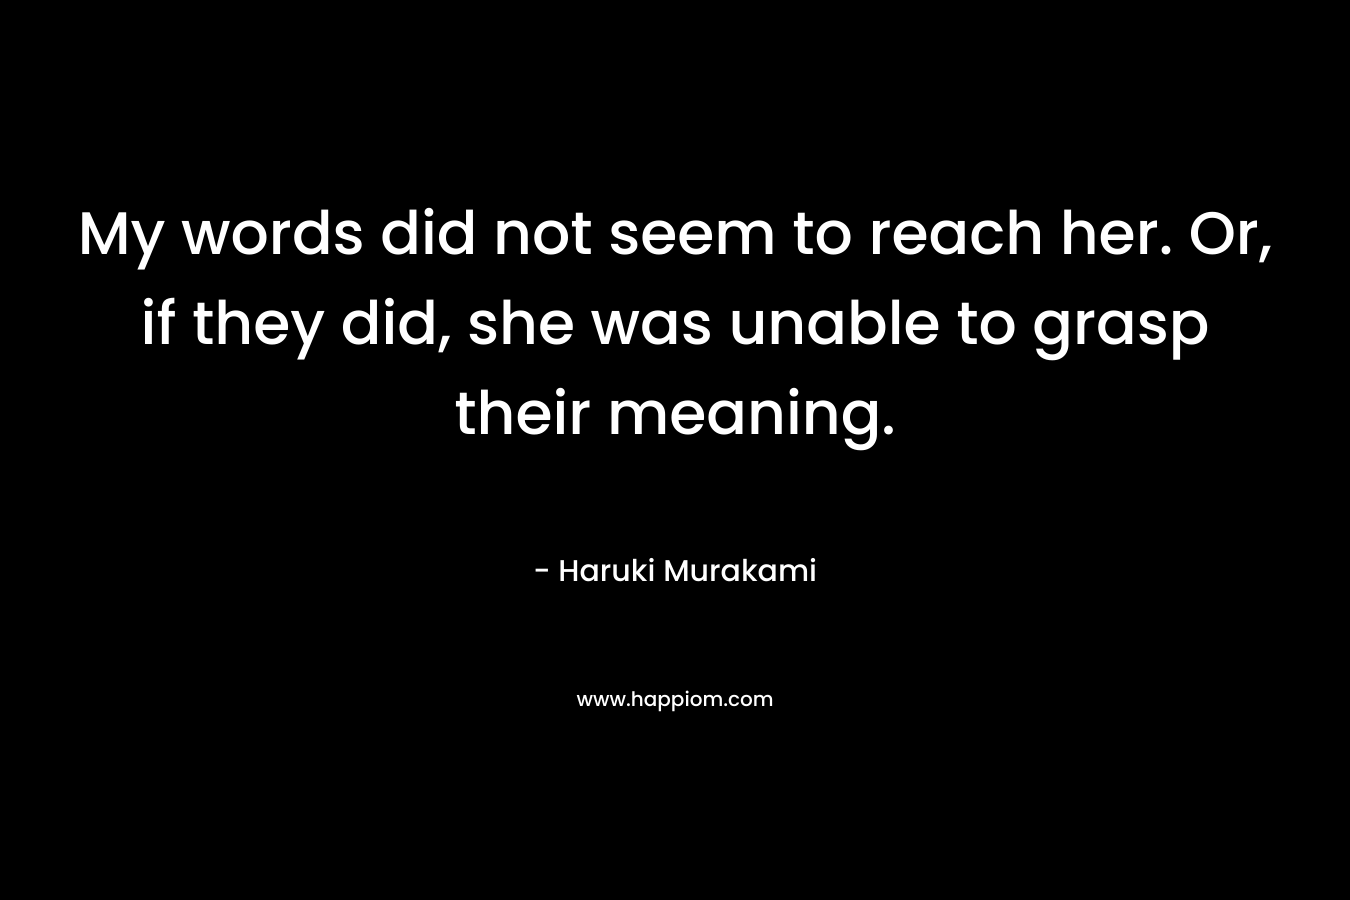 My words did not seem to reach her. Or, if they did, she was unable to grasp their meaning.